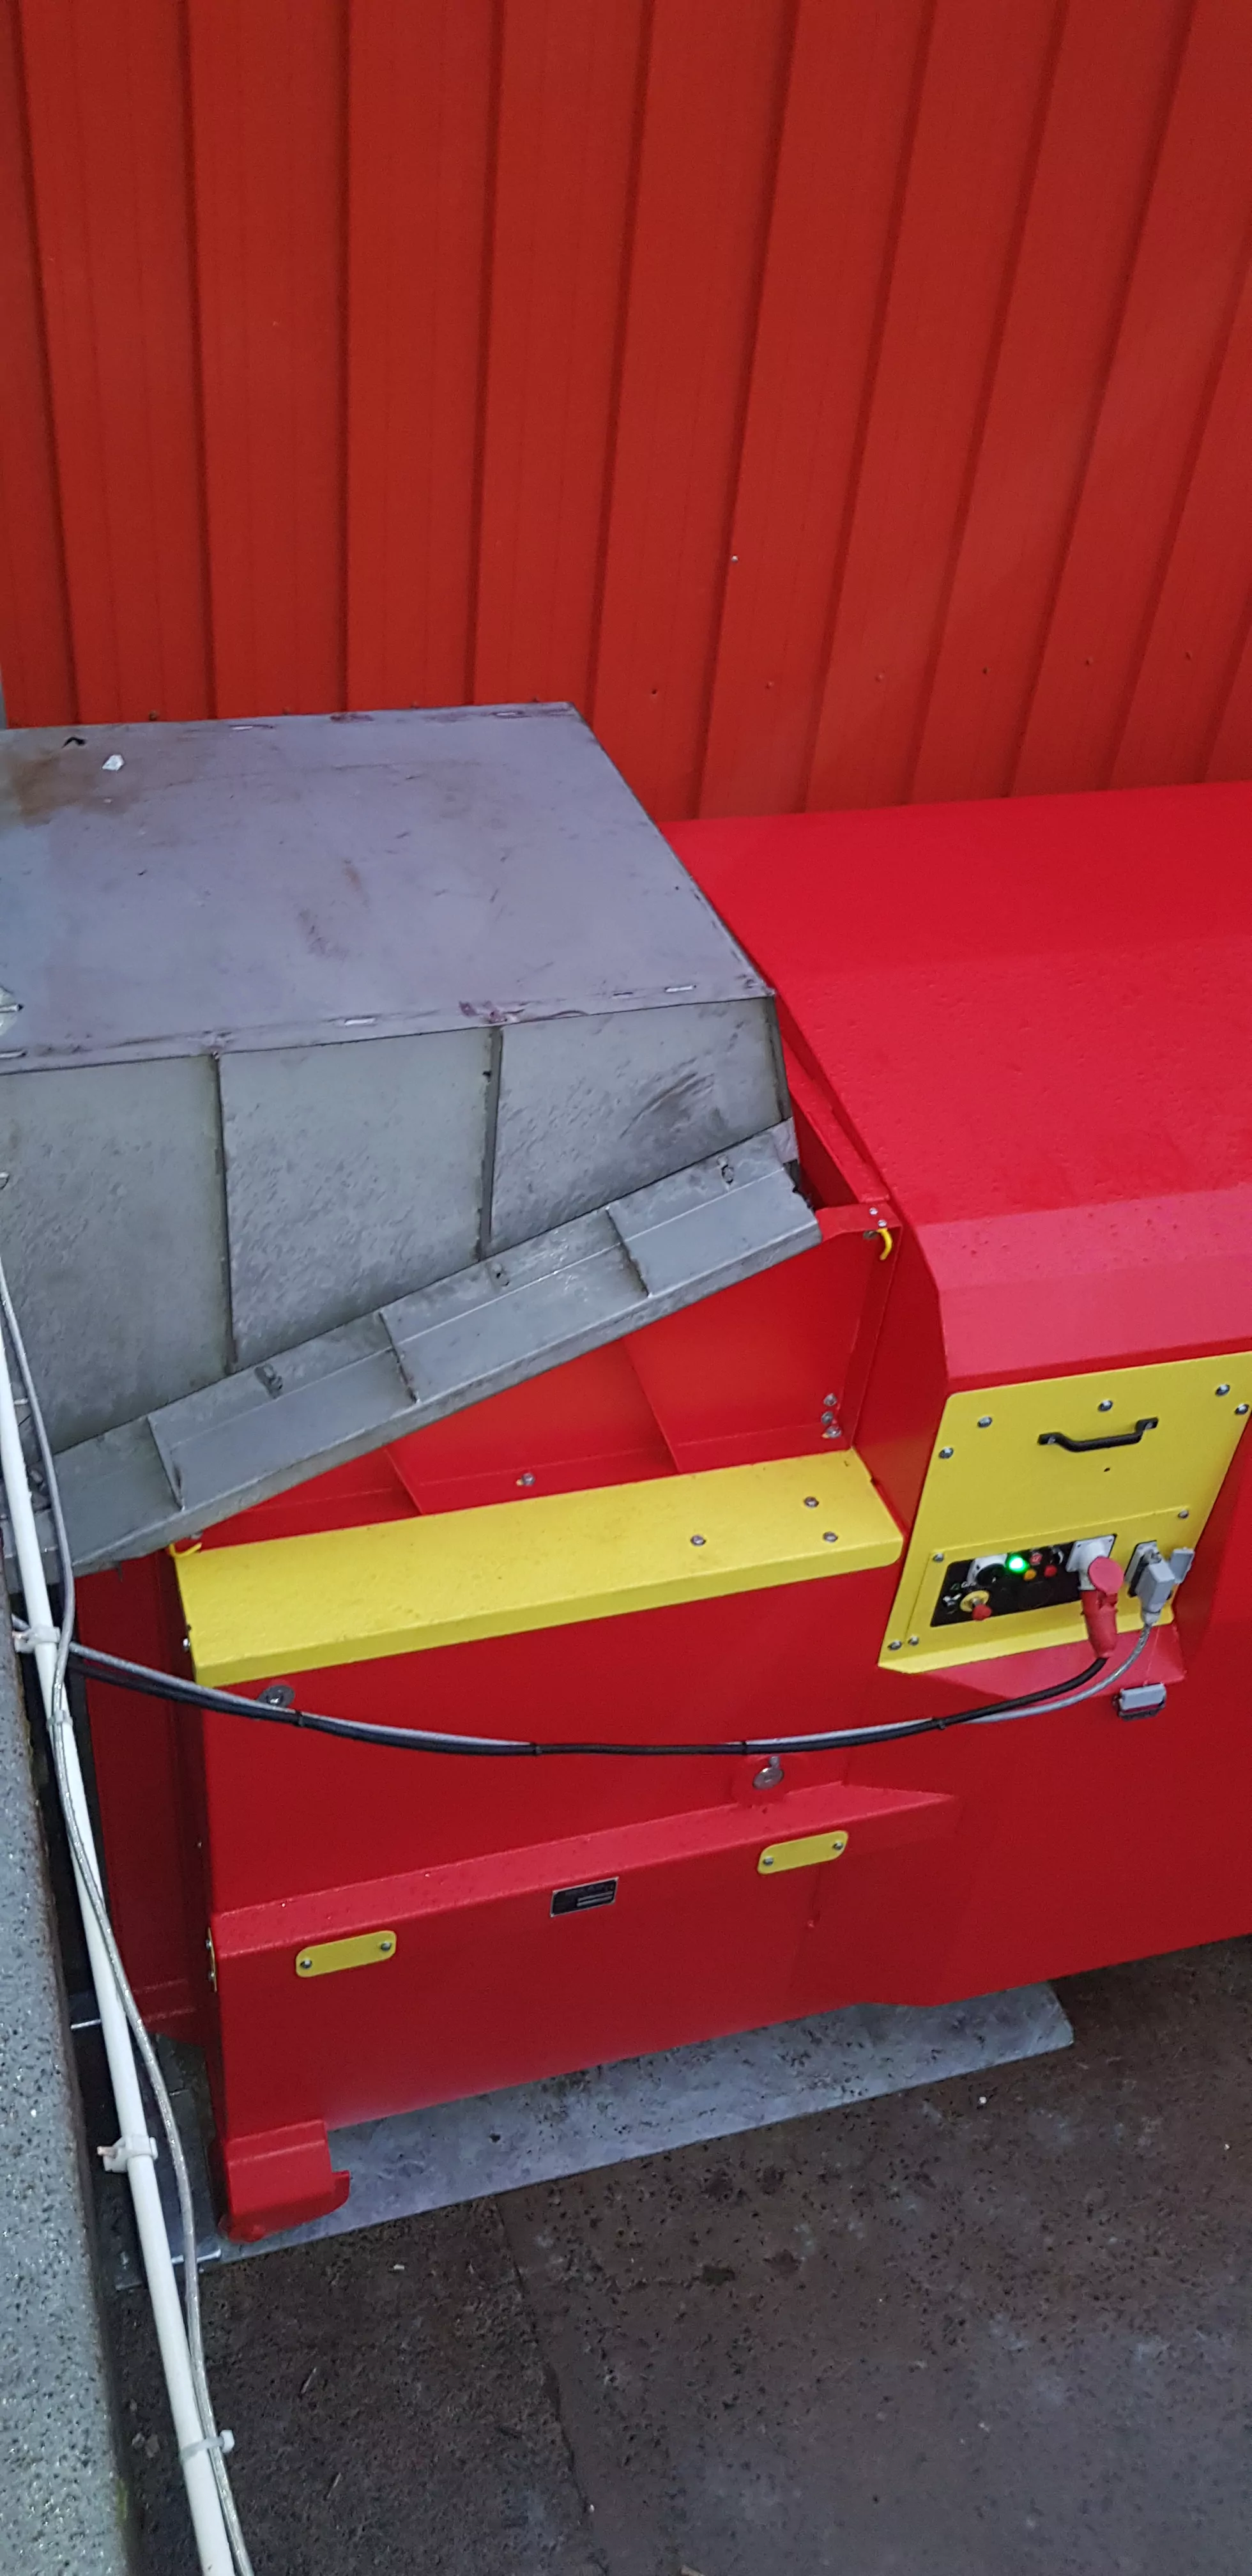 Chute fed compactor, chute feed system, waste compactor 